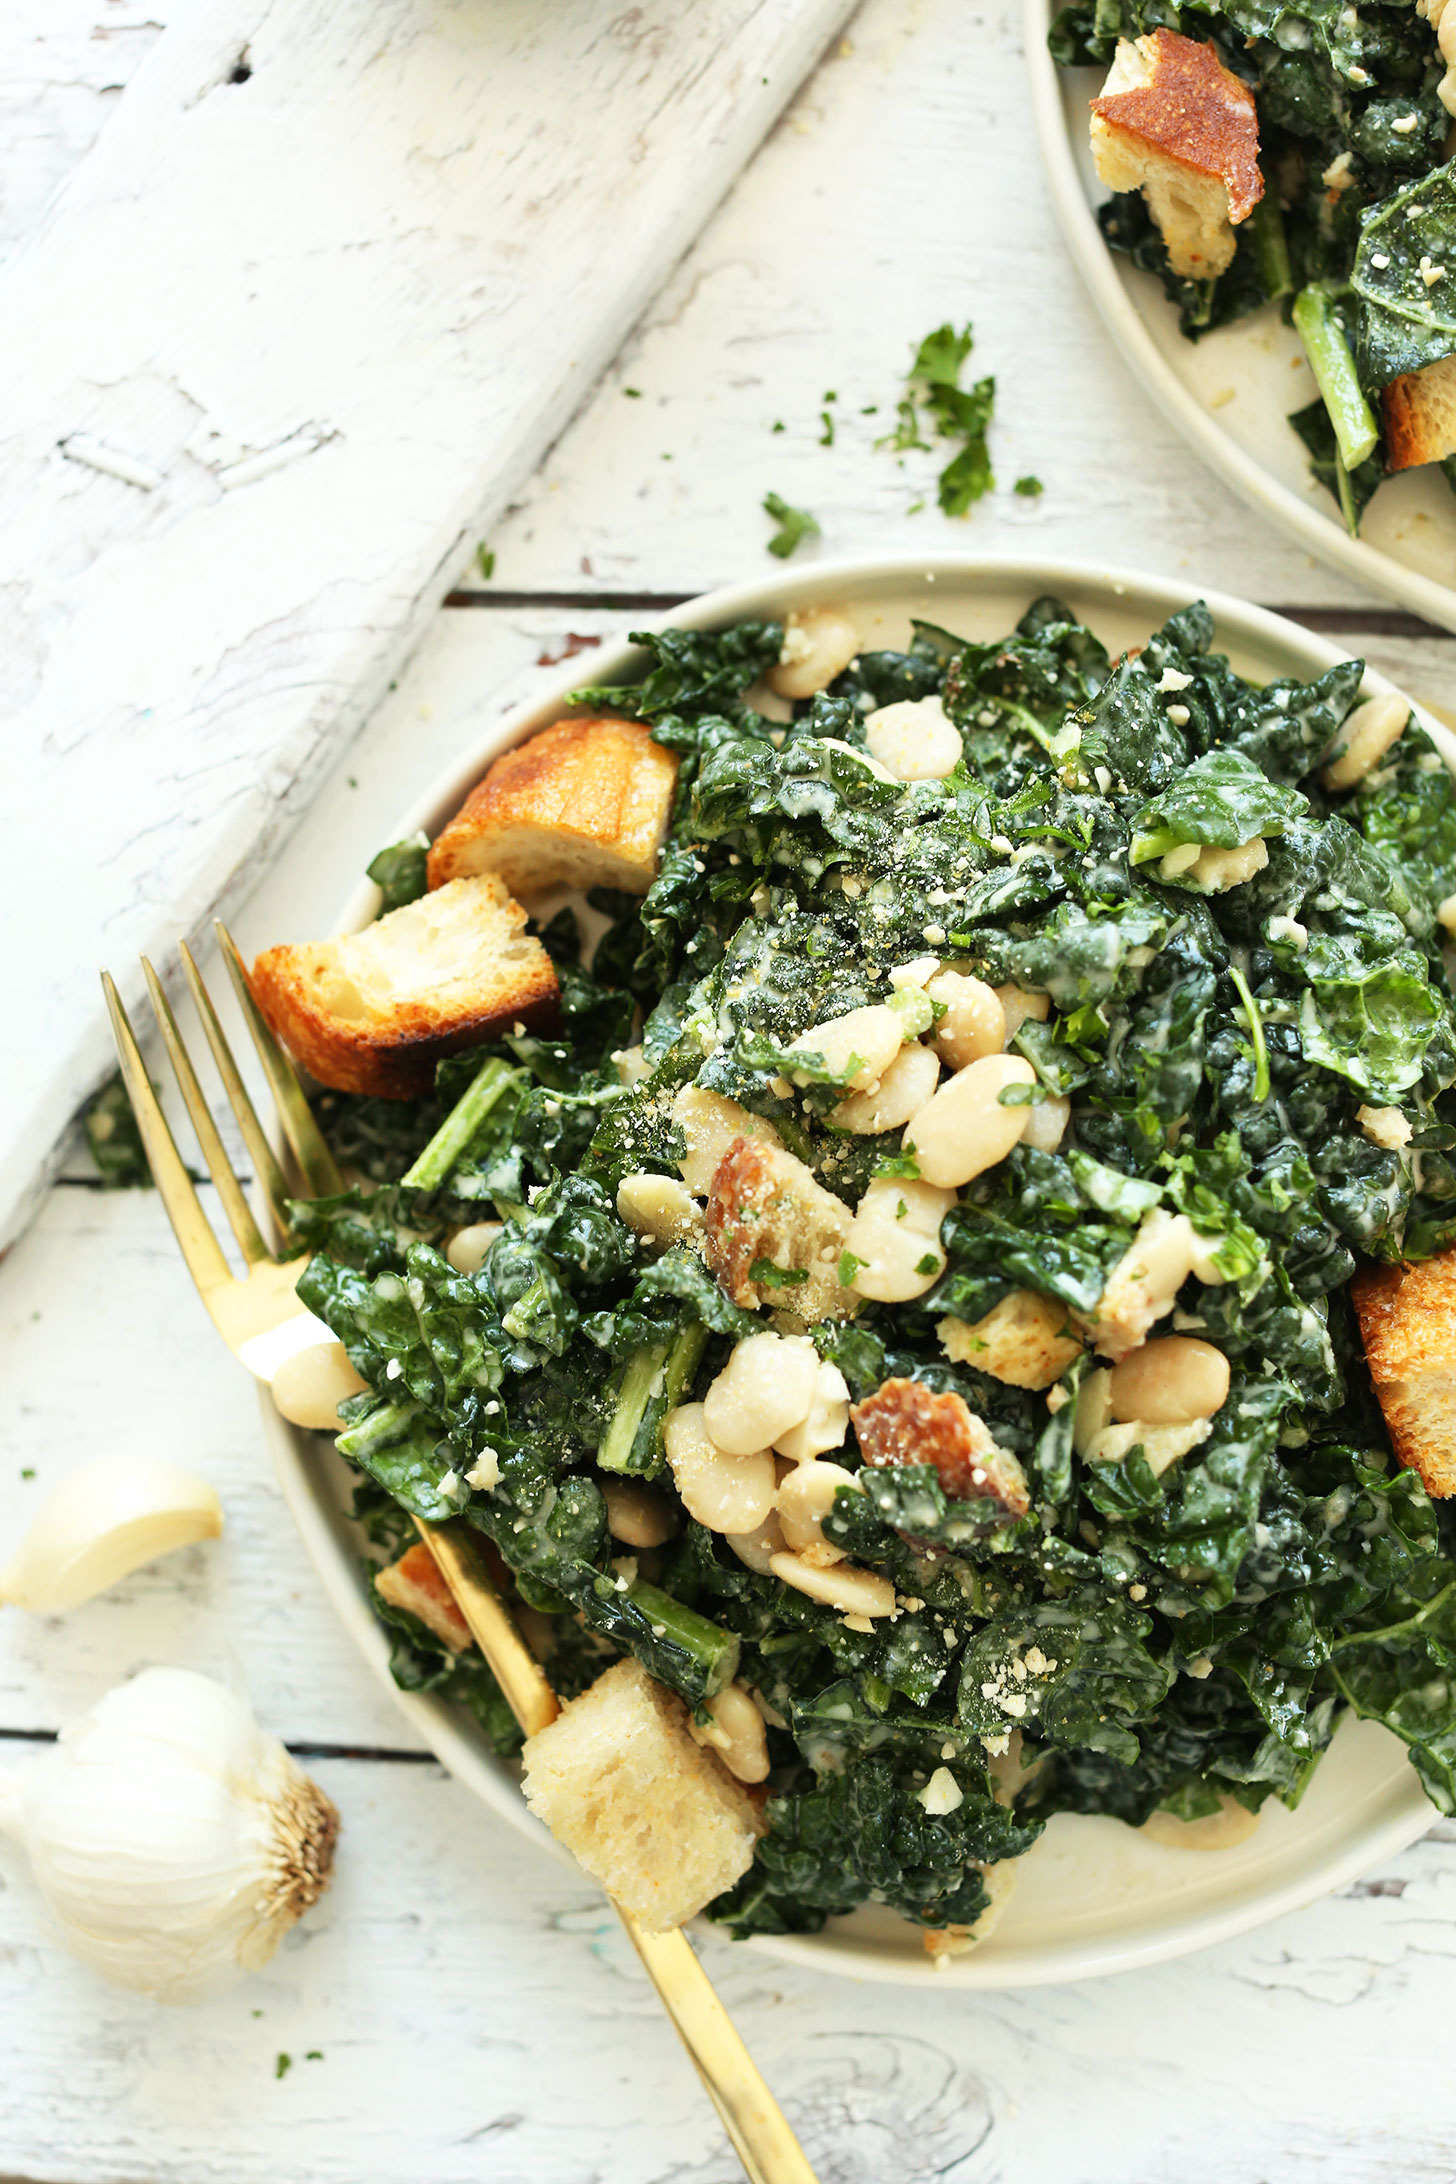 Dinner plate filled with Lemony Garlic Kale Salad with Butter Beans and Garlic Croutons